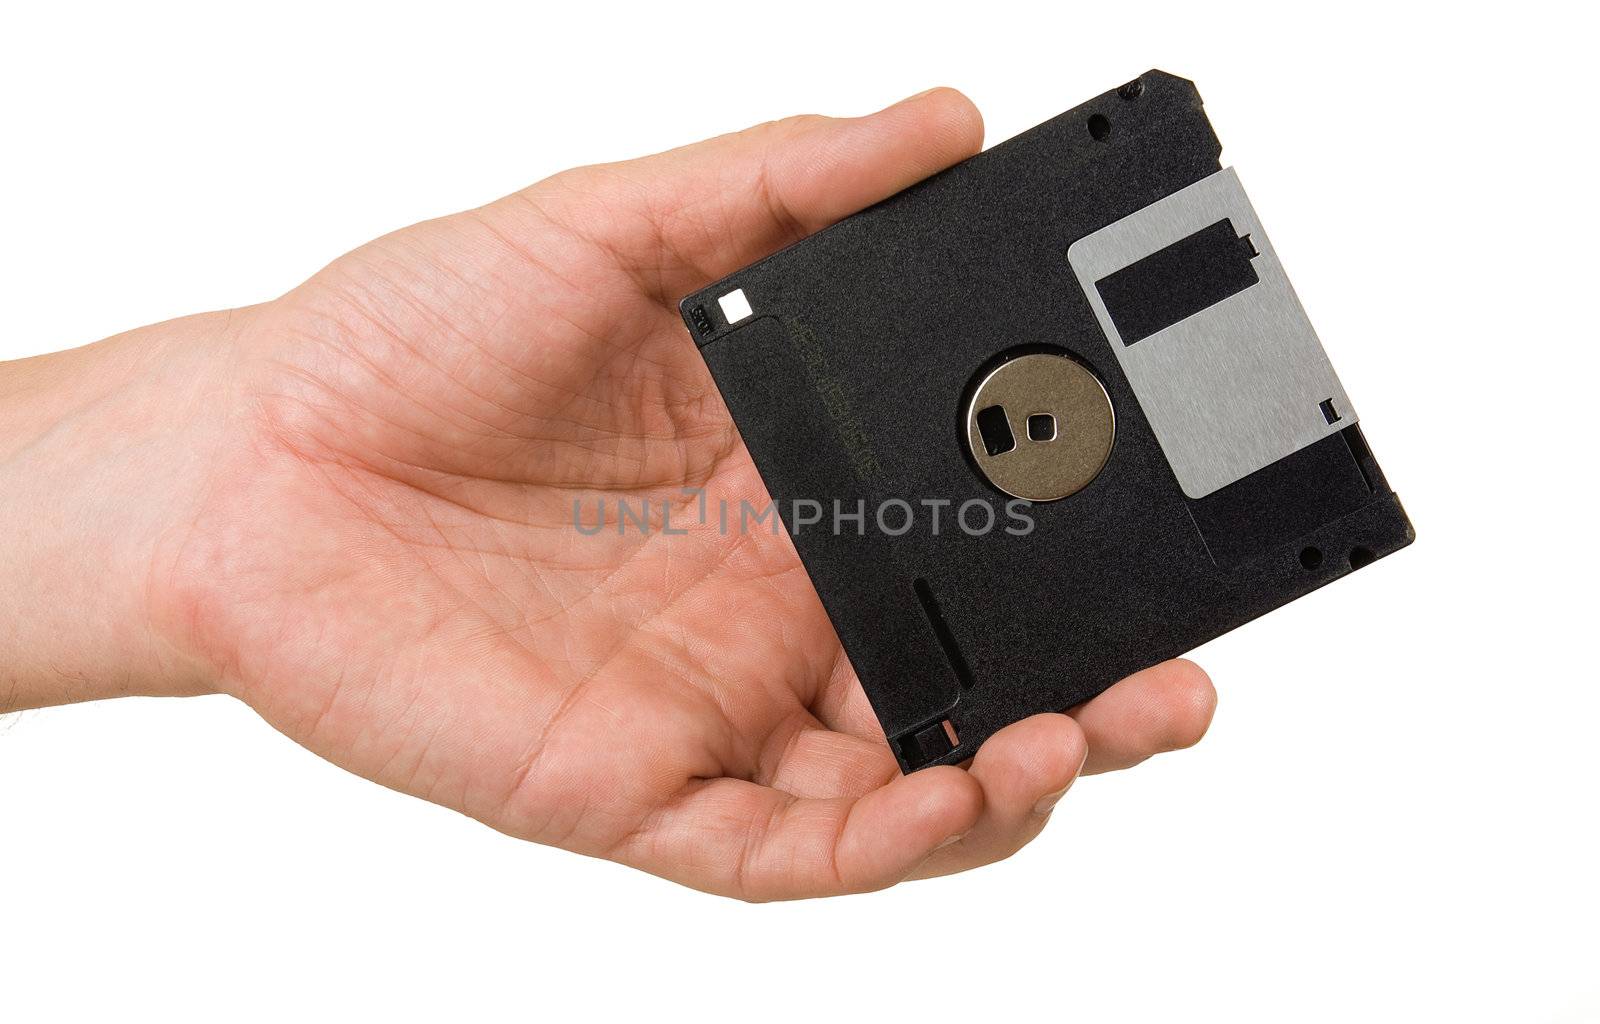 ifloppy disk in hand isolated solated on white background 